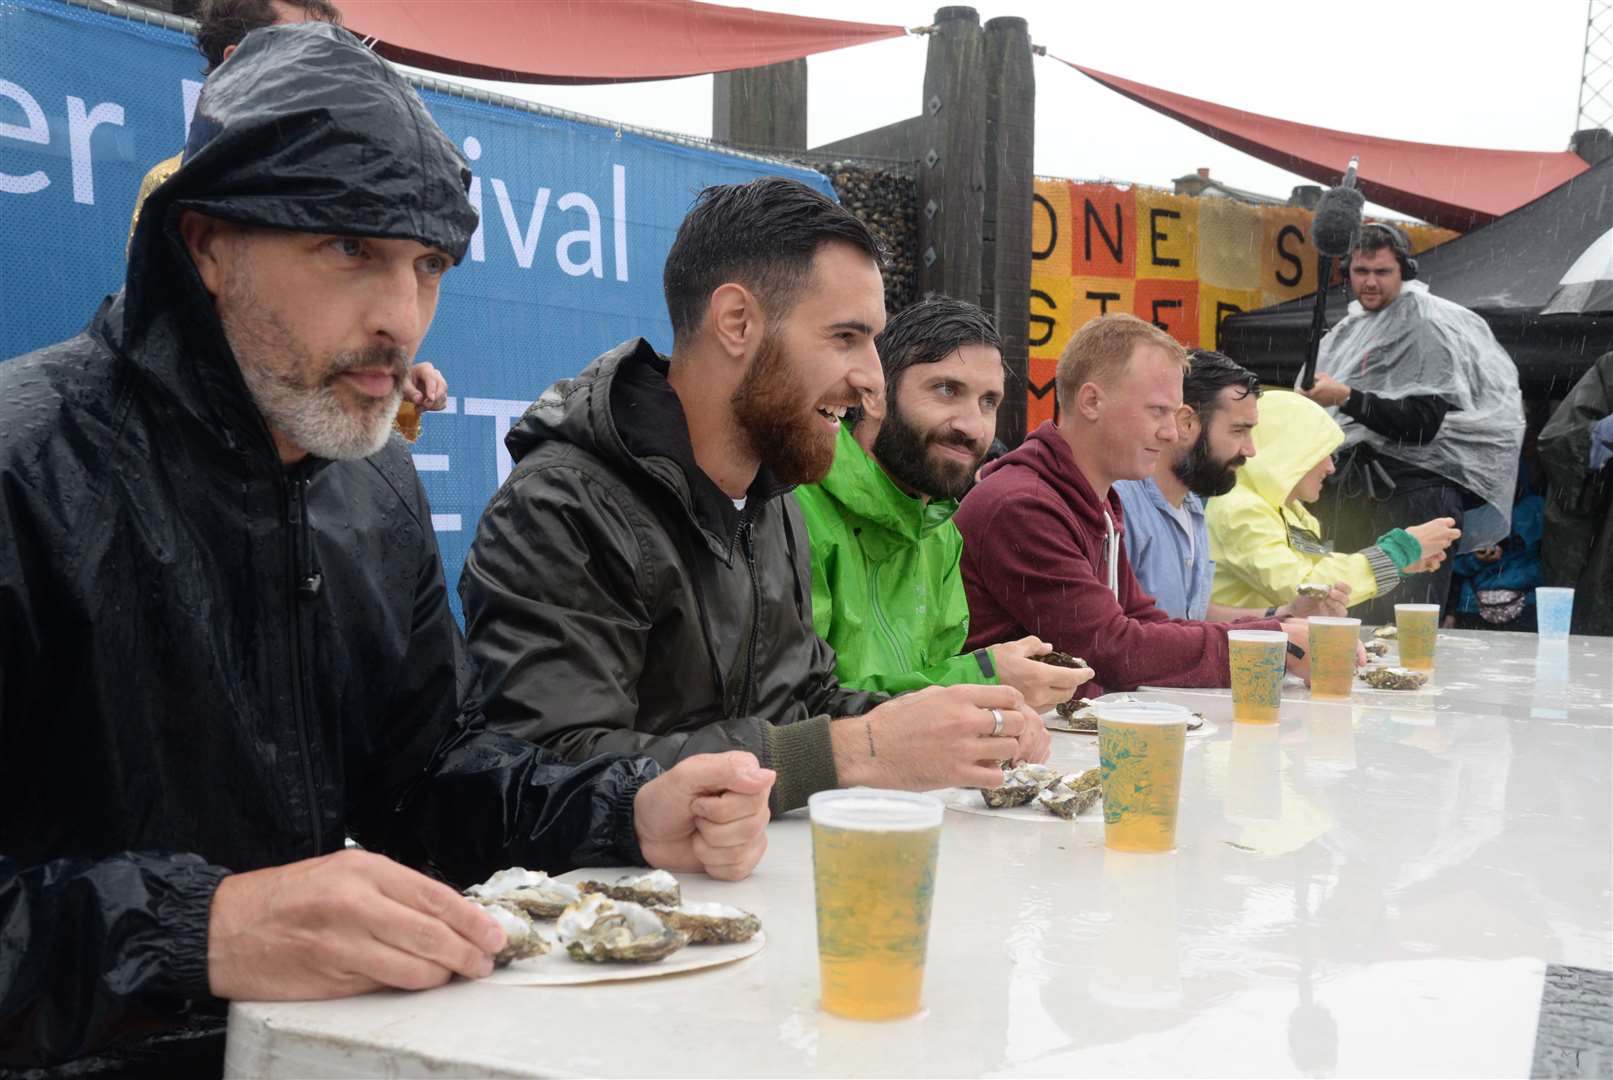 The oyster eating competition took place despite the rain at last year's Whitstable Oyster Festival